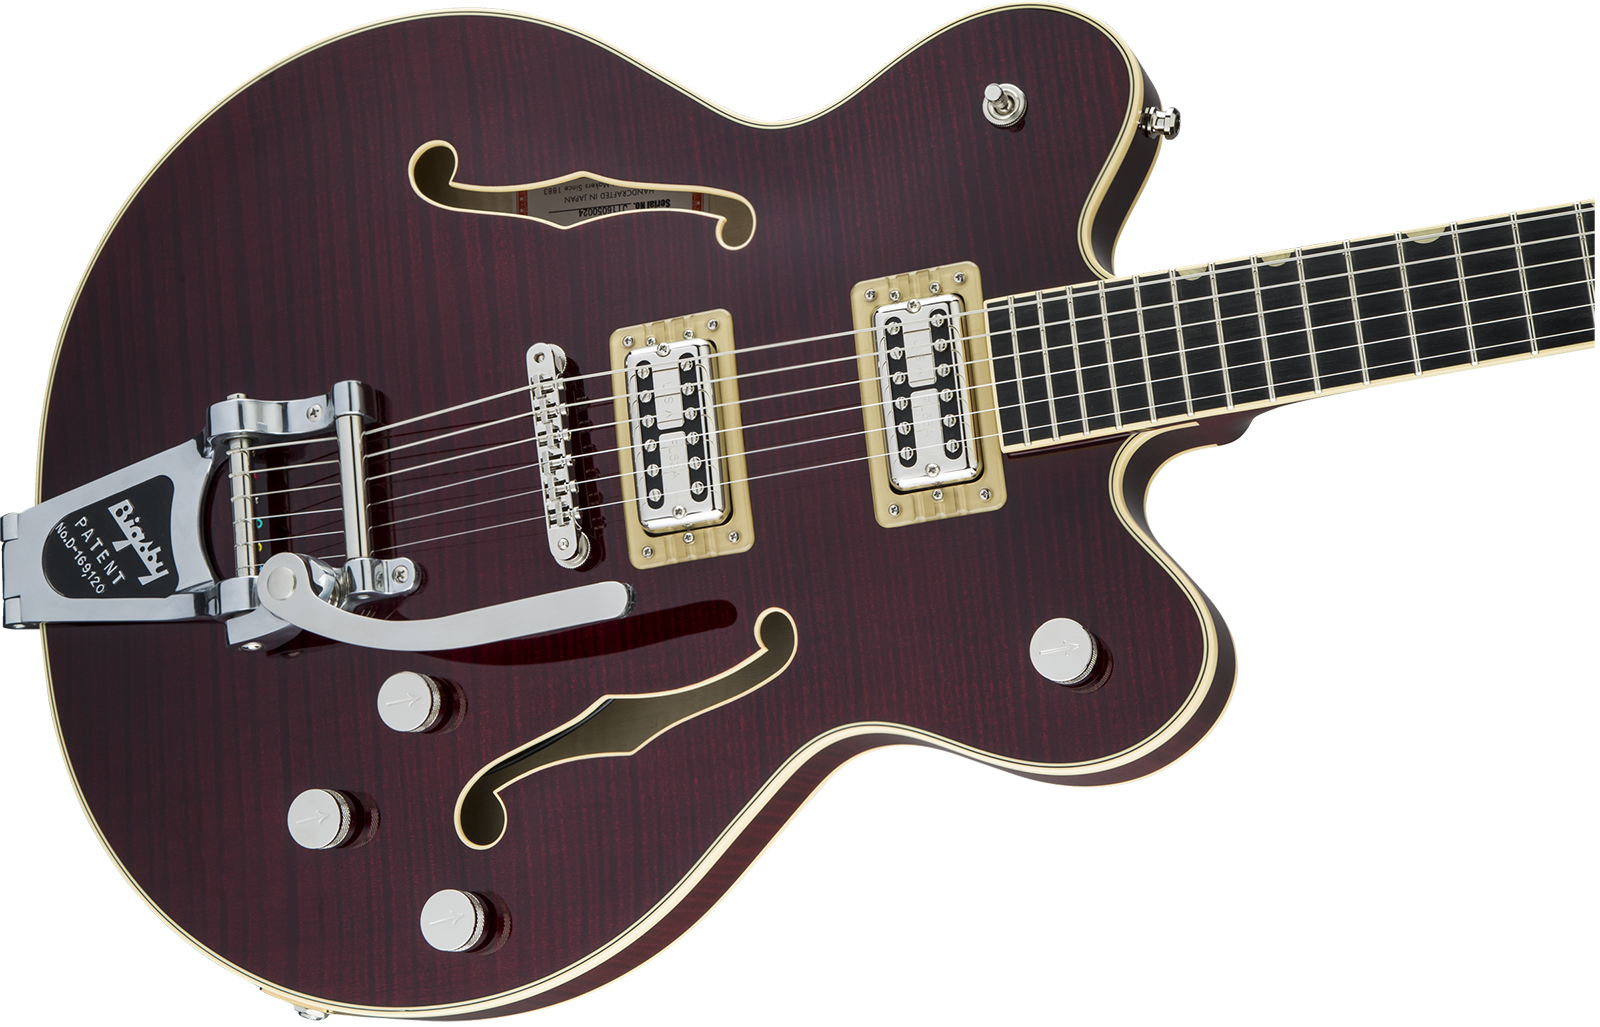 Gretsch G6609tfm Broadkaster Center Bloc Dc Players Edition Pro Jap Bigsby Eb - Dark Cherry Stain - Guitare Électrique 1/2 Caisse - Variation 2